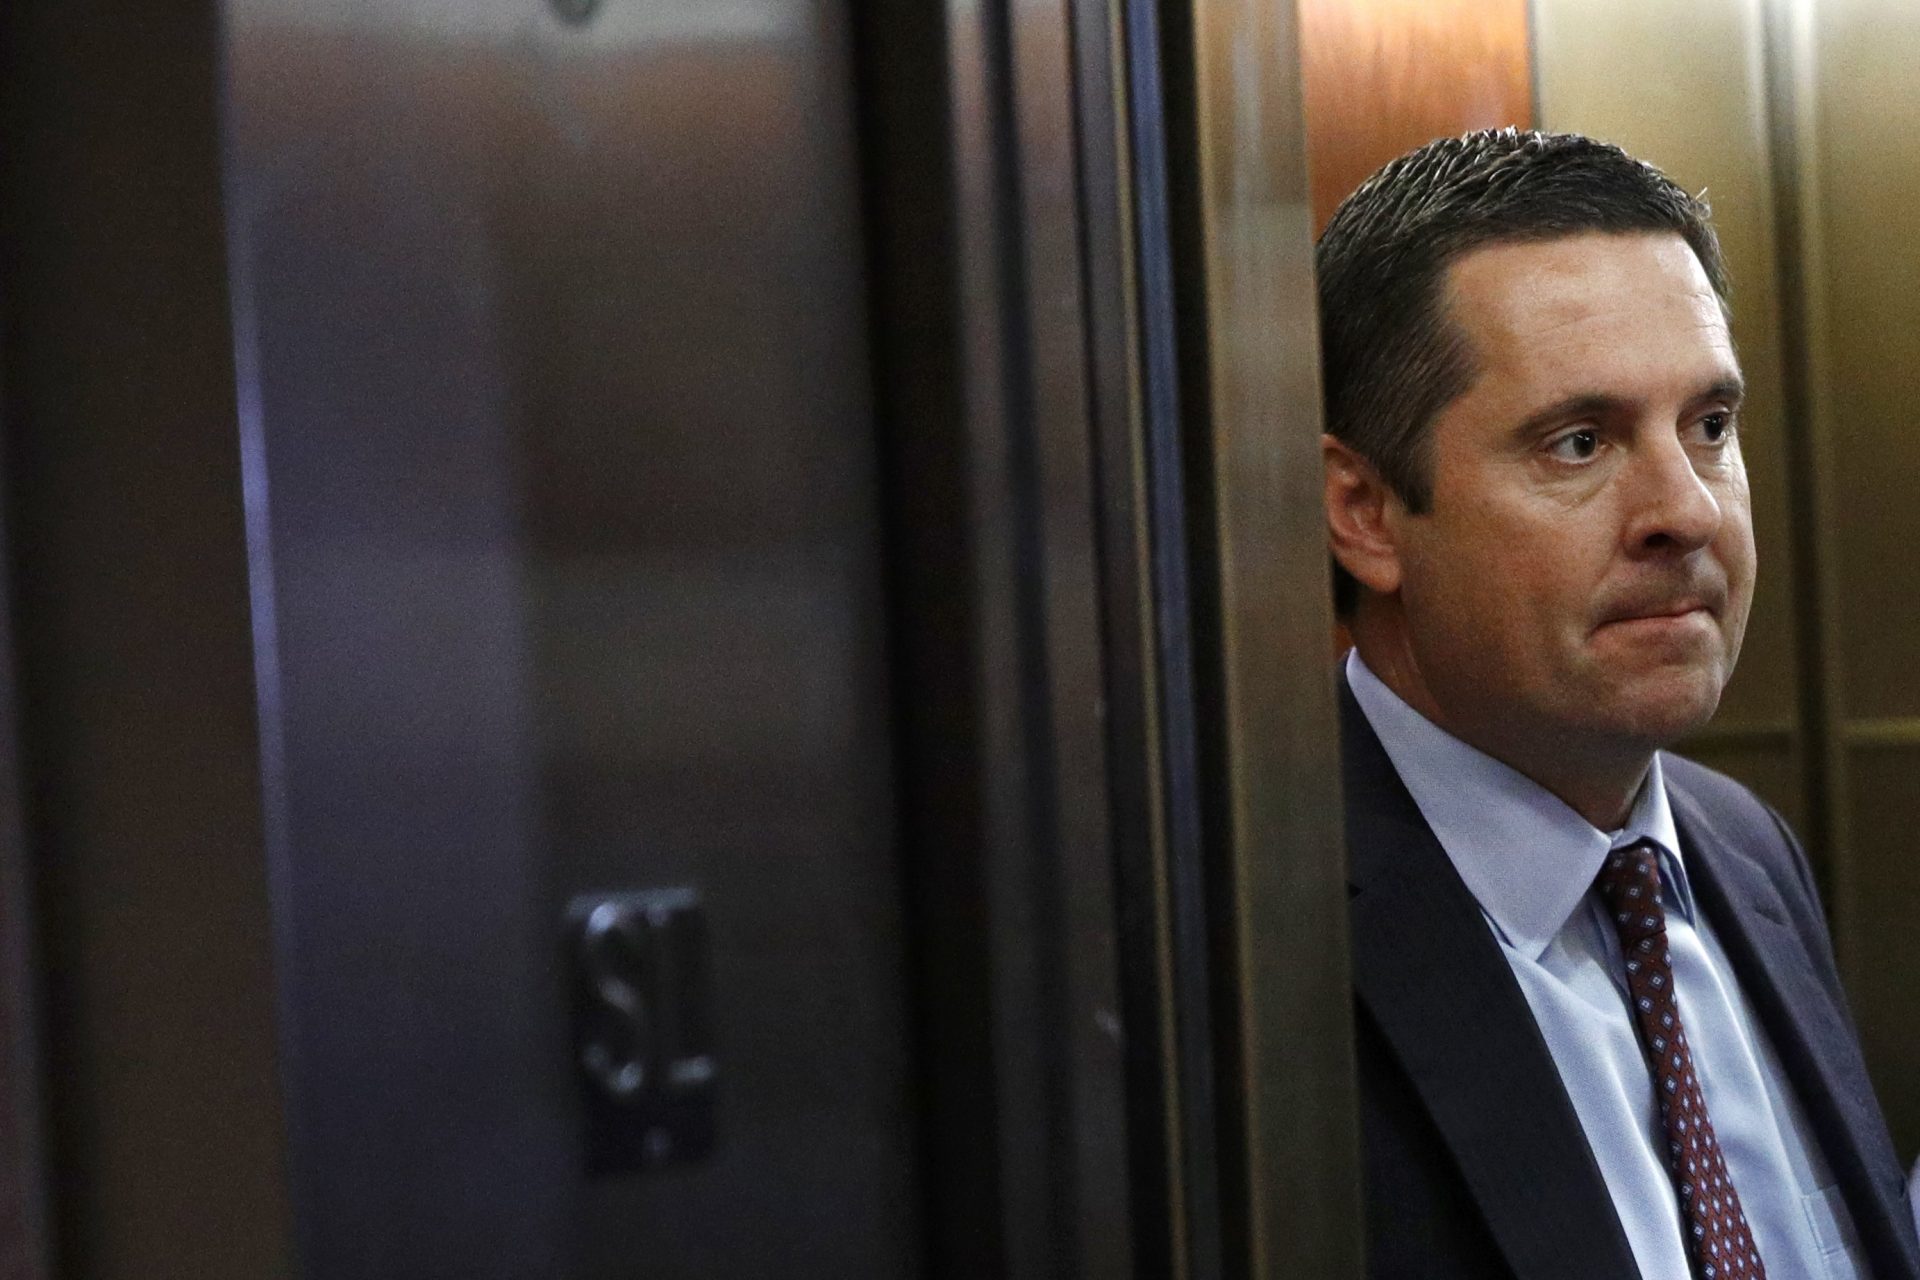 Rep. Devin Nunes, R-Calif., stands in an elevator after departing a secure area of the Capitol in Washington, Tuesday, Dec. 3, 2019. The Democrats on the House Intelligence Committee have released a sweeping impeachment report outlining evidence of what it calls President Donald Trump's wrongdoing toward Ukraine.